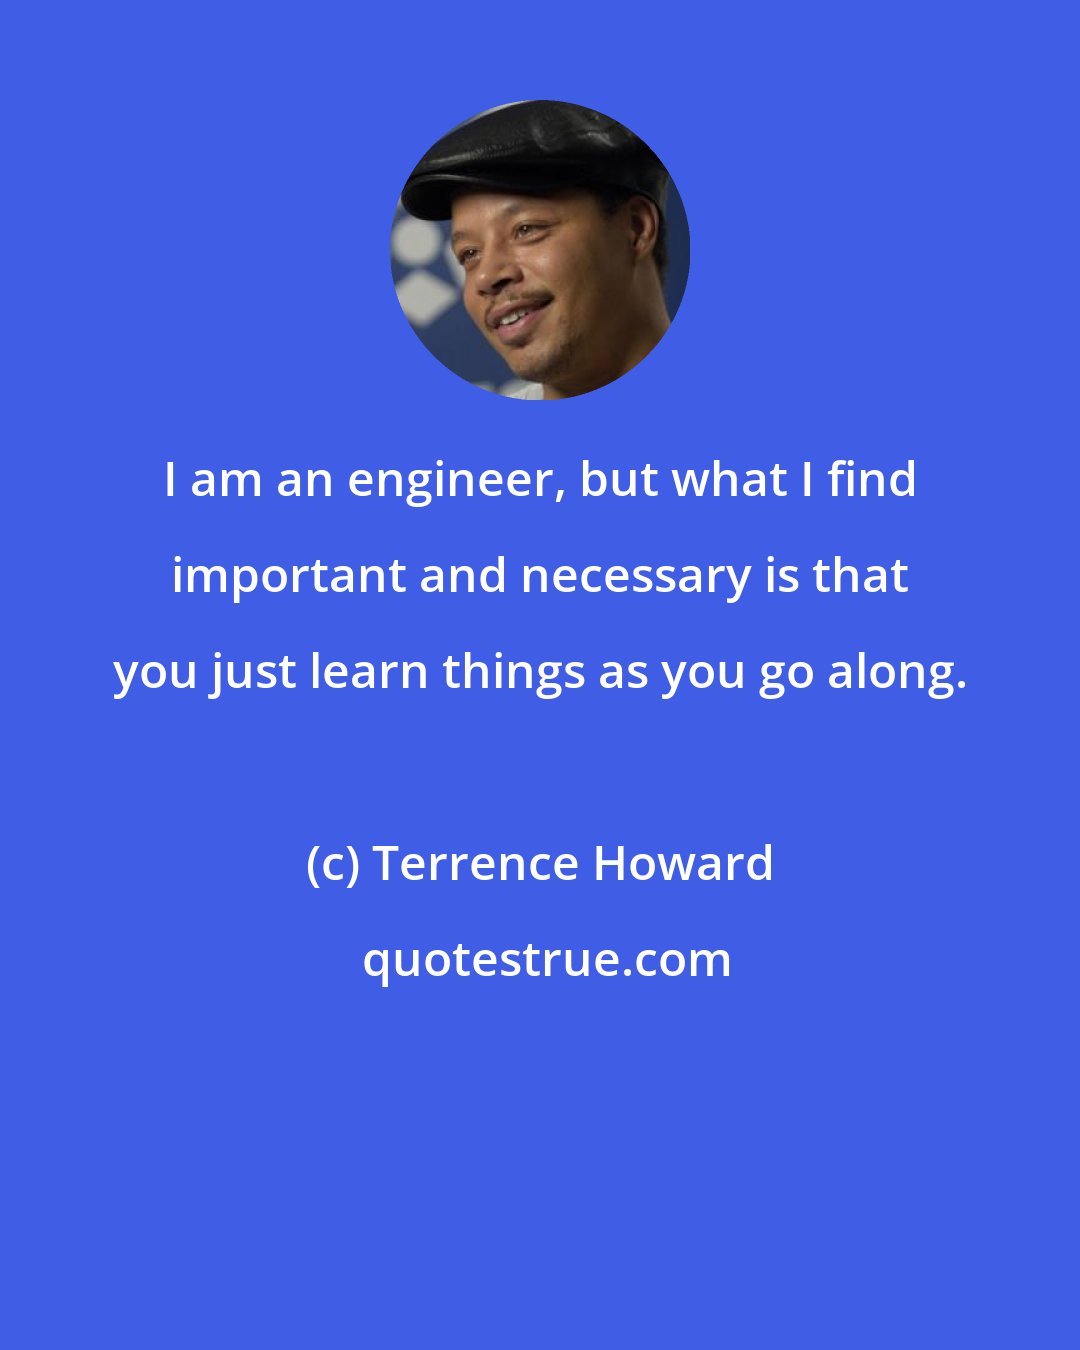 Terrence Howard: I am an engineer, but what I find important and necessary is that you just learn things as you go along.